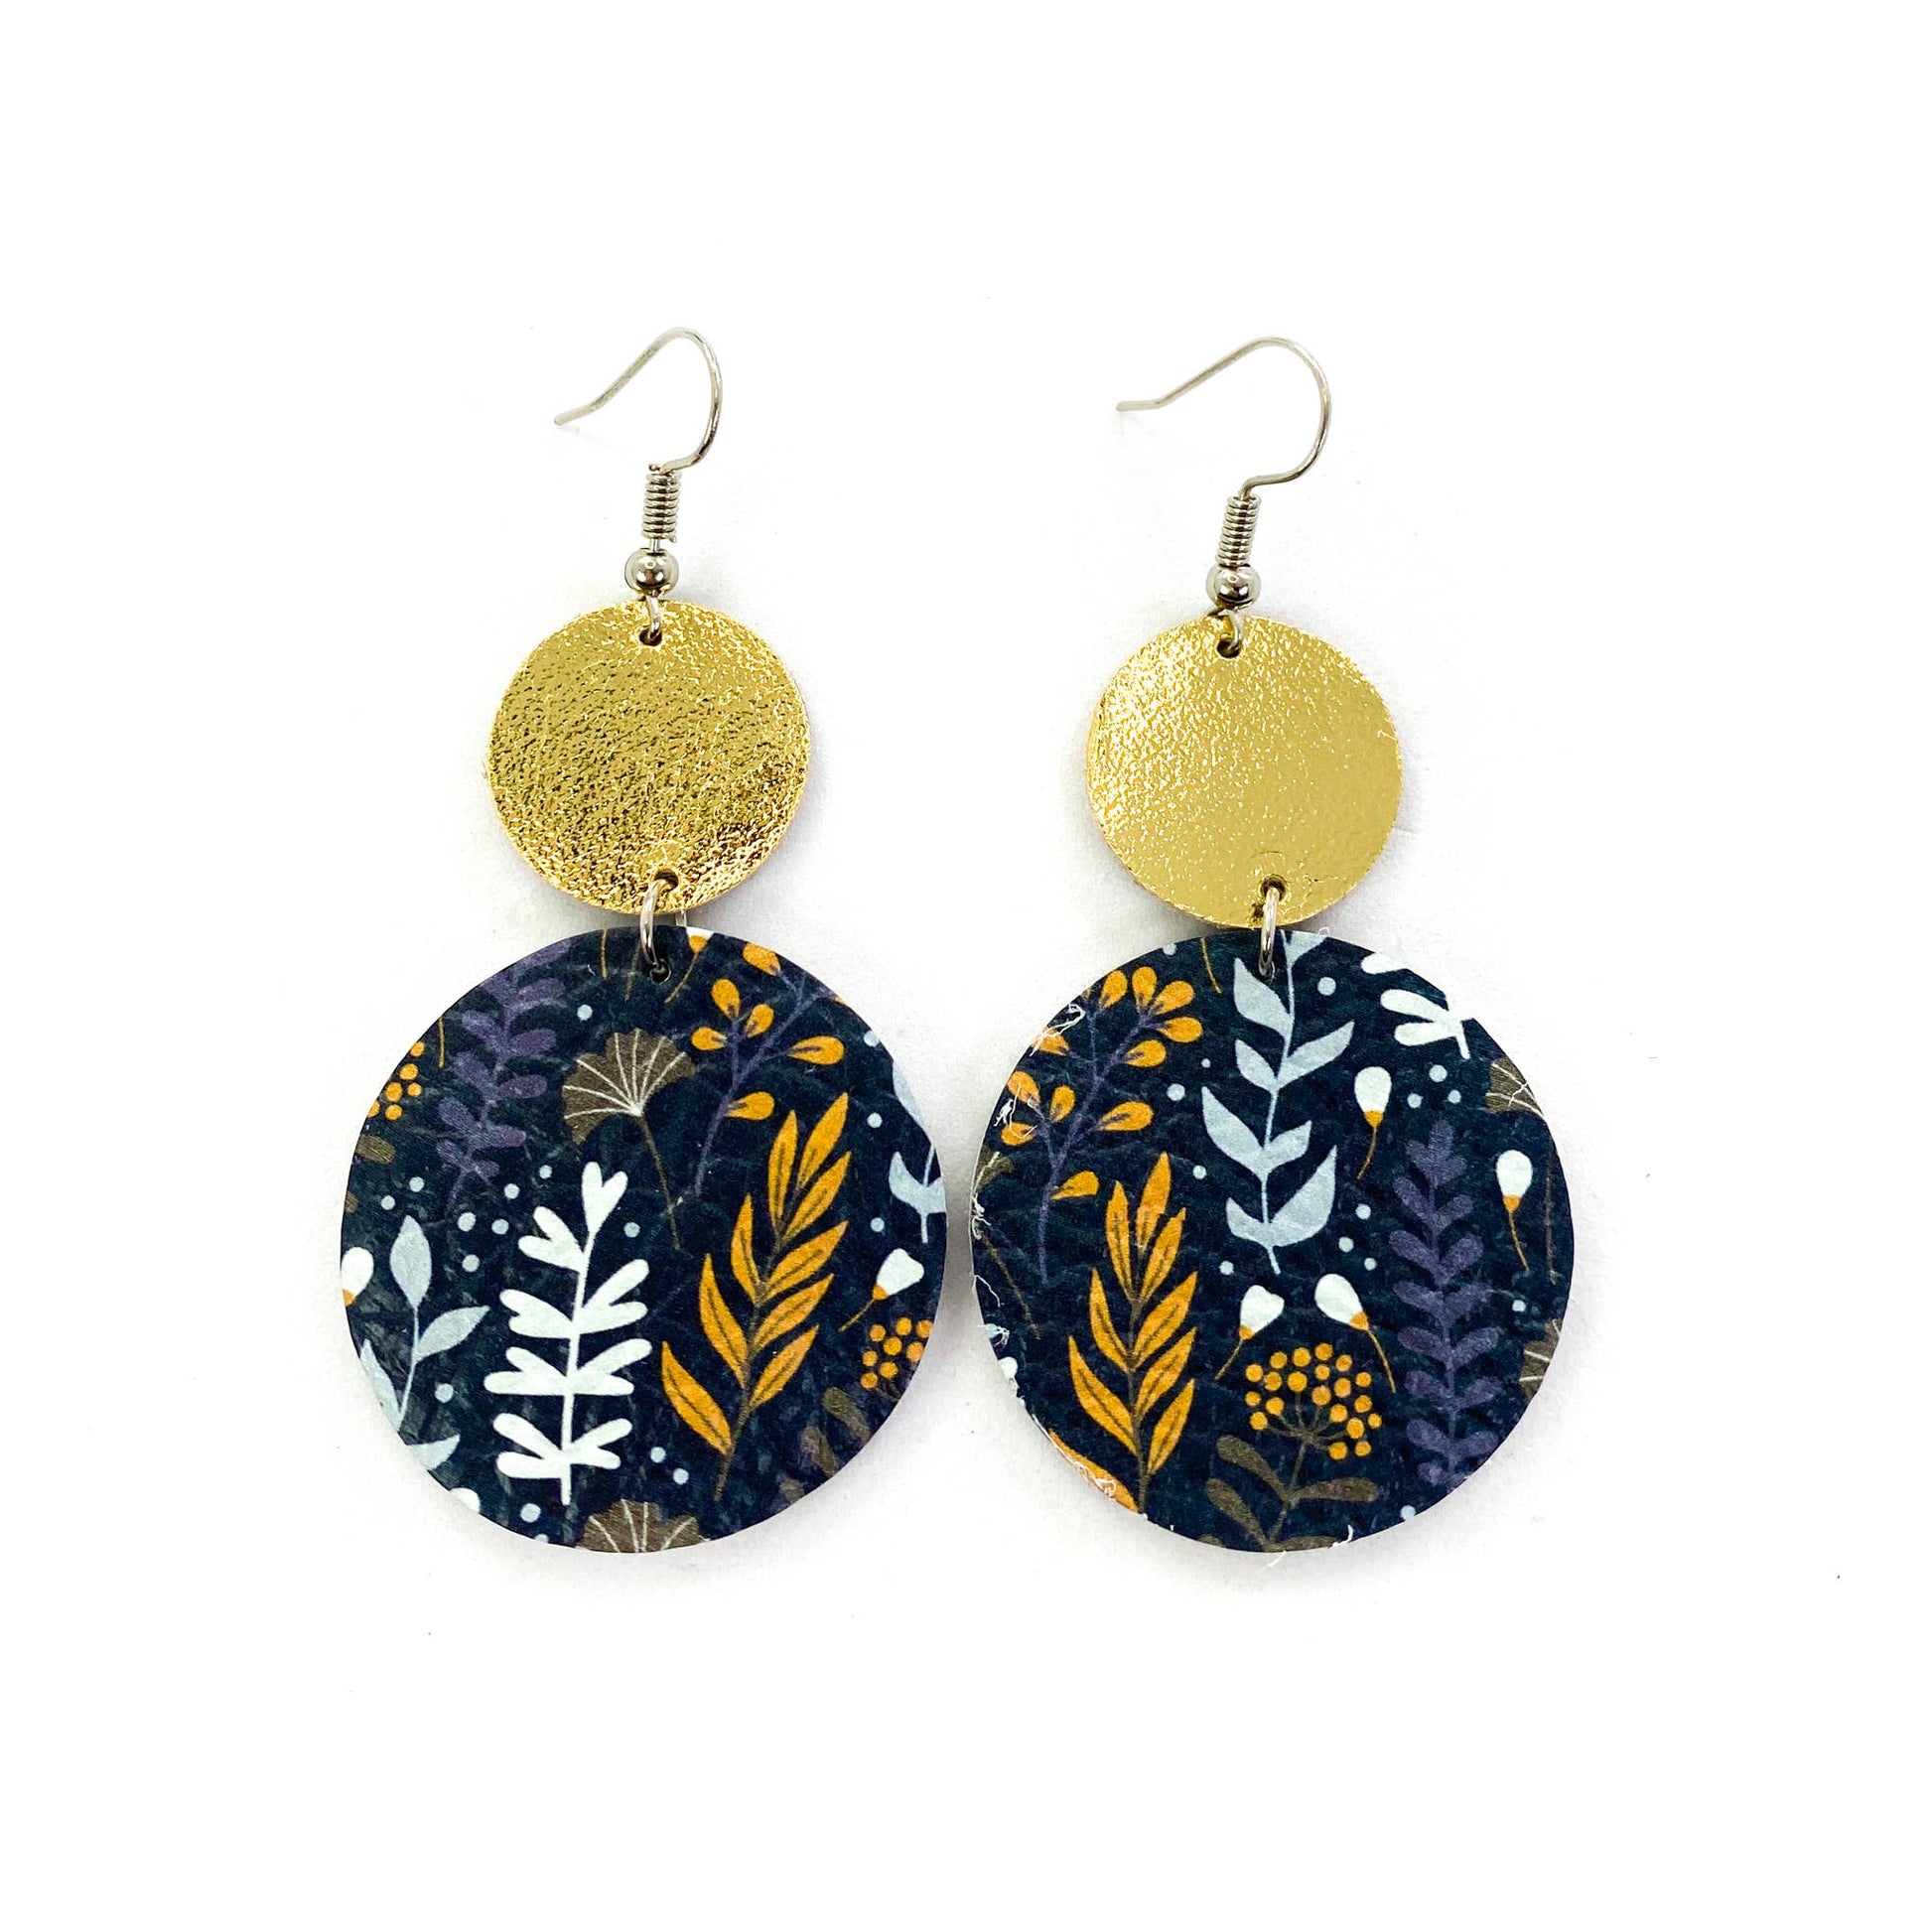 Navy and Wild Floral Leather Earrings - E Squared Goods & Co.